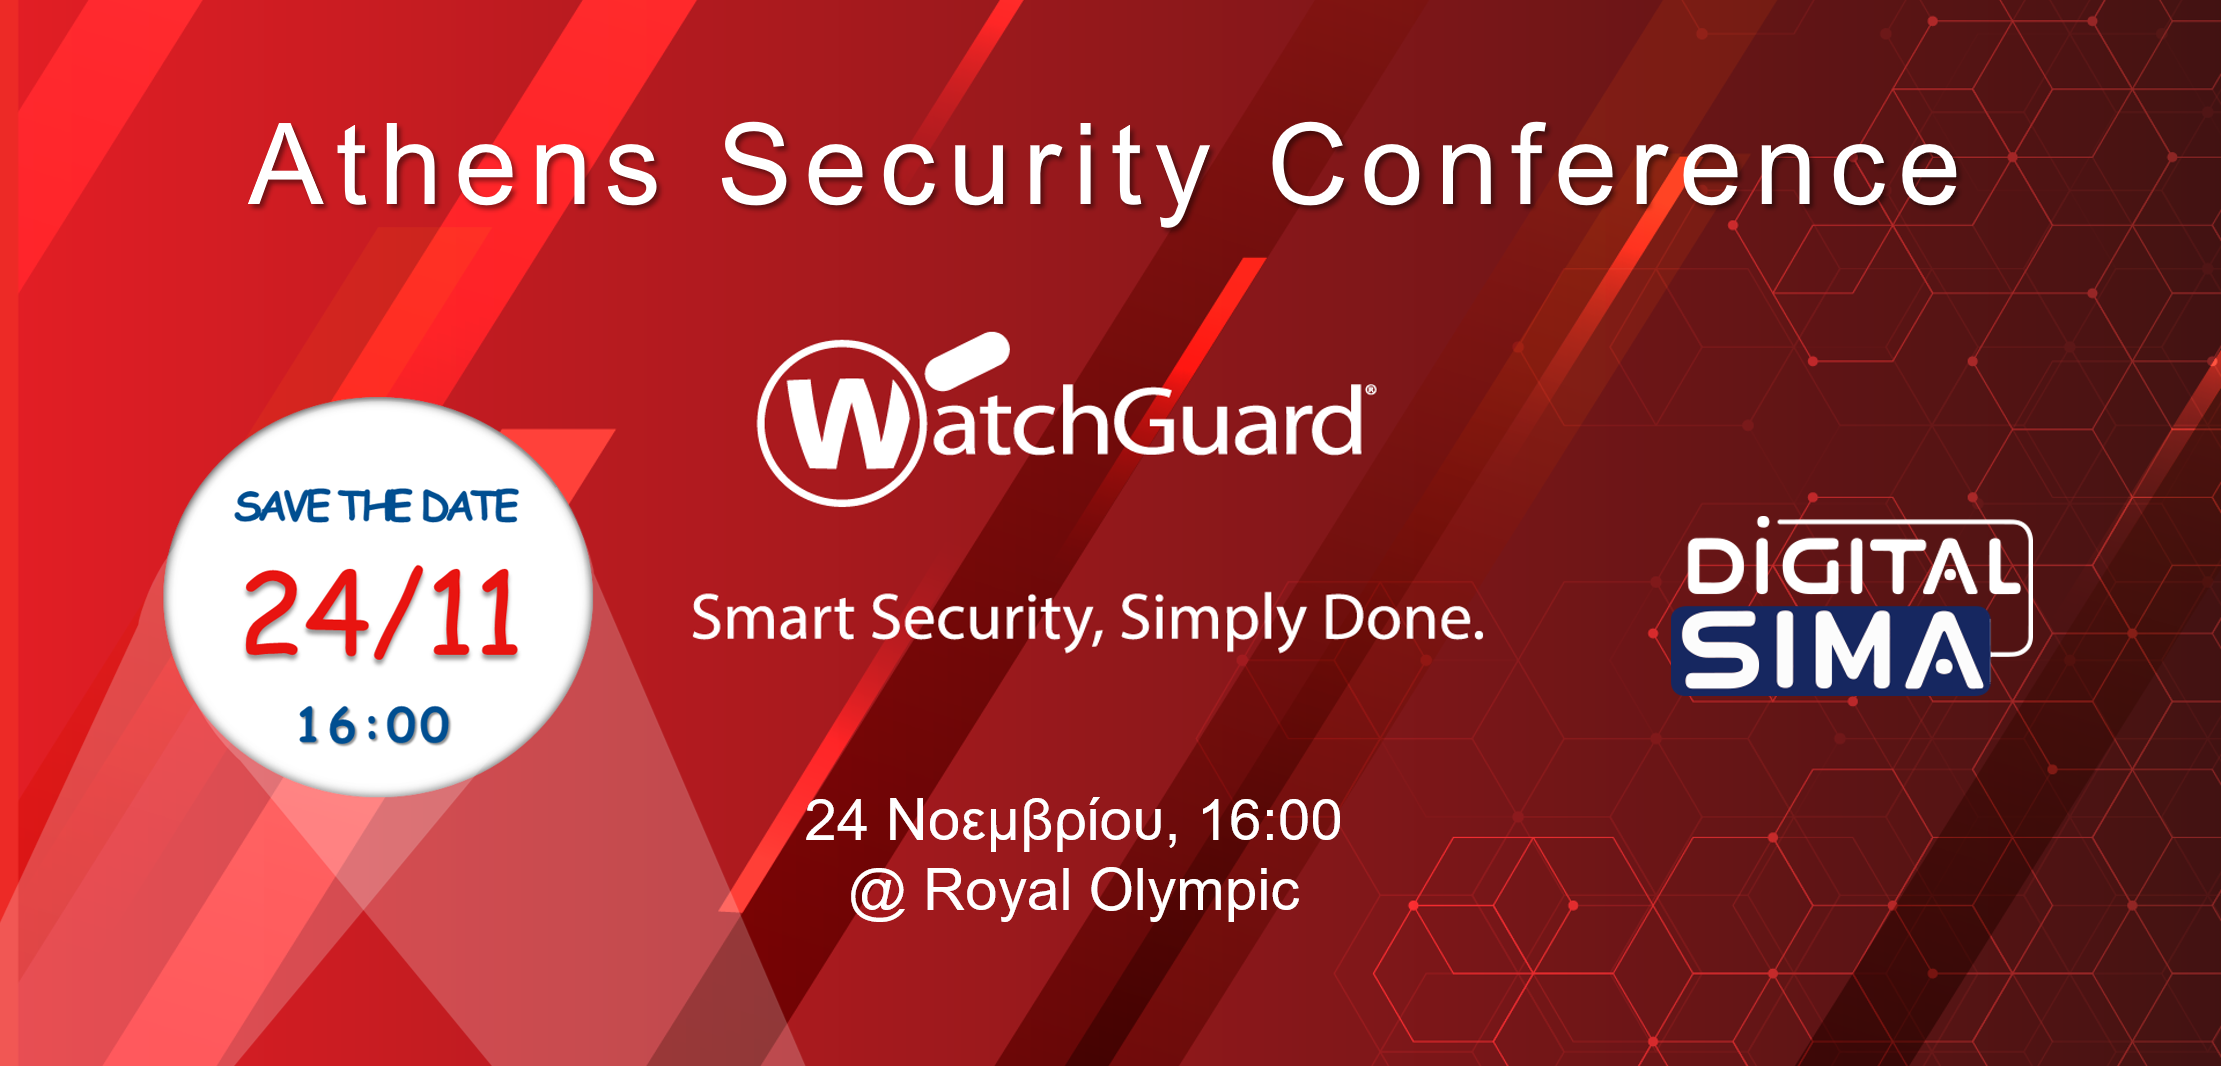 Athens Security Conference by WatchGuard